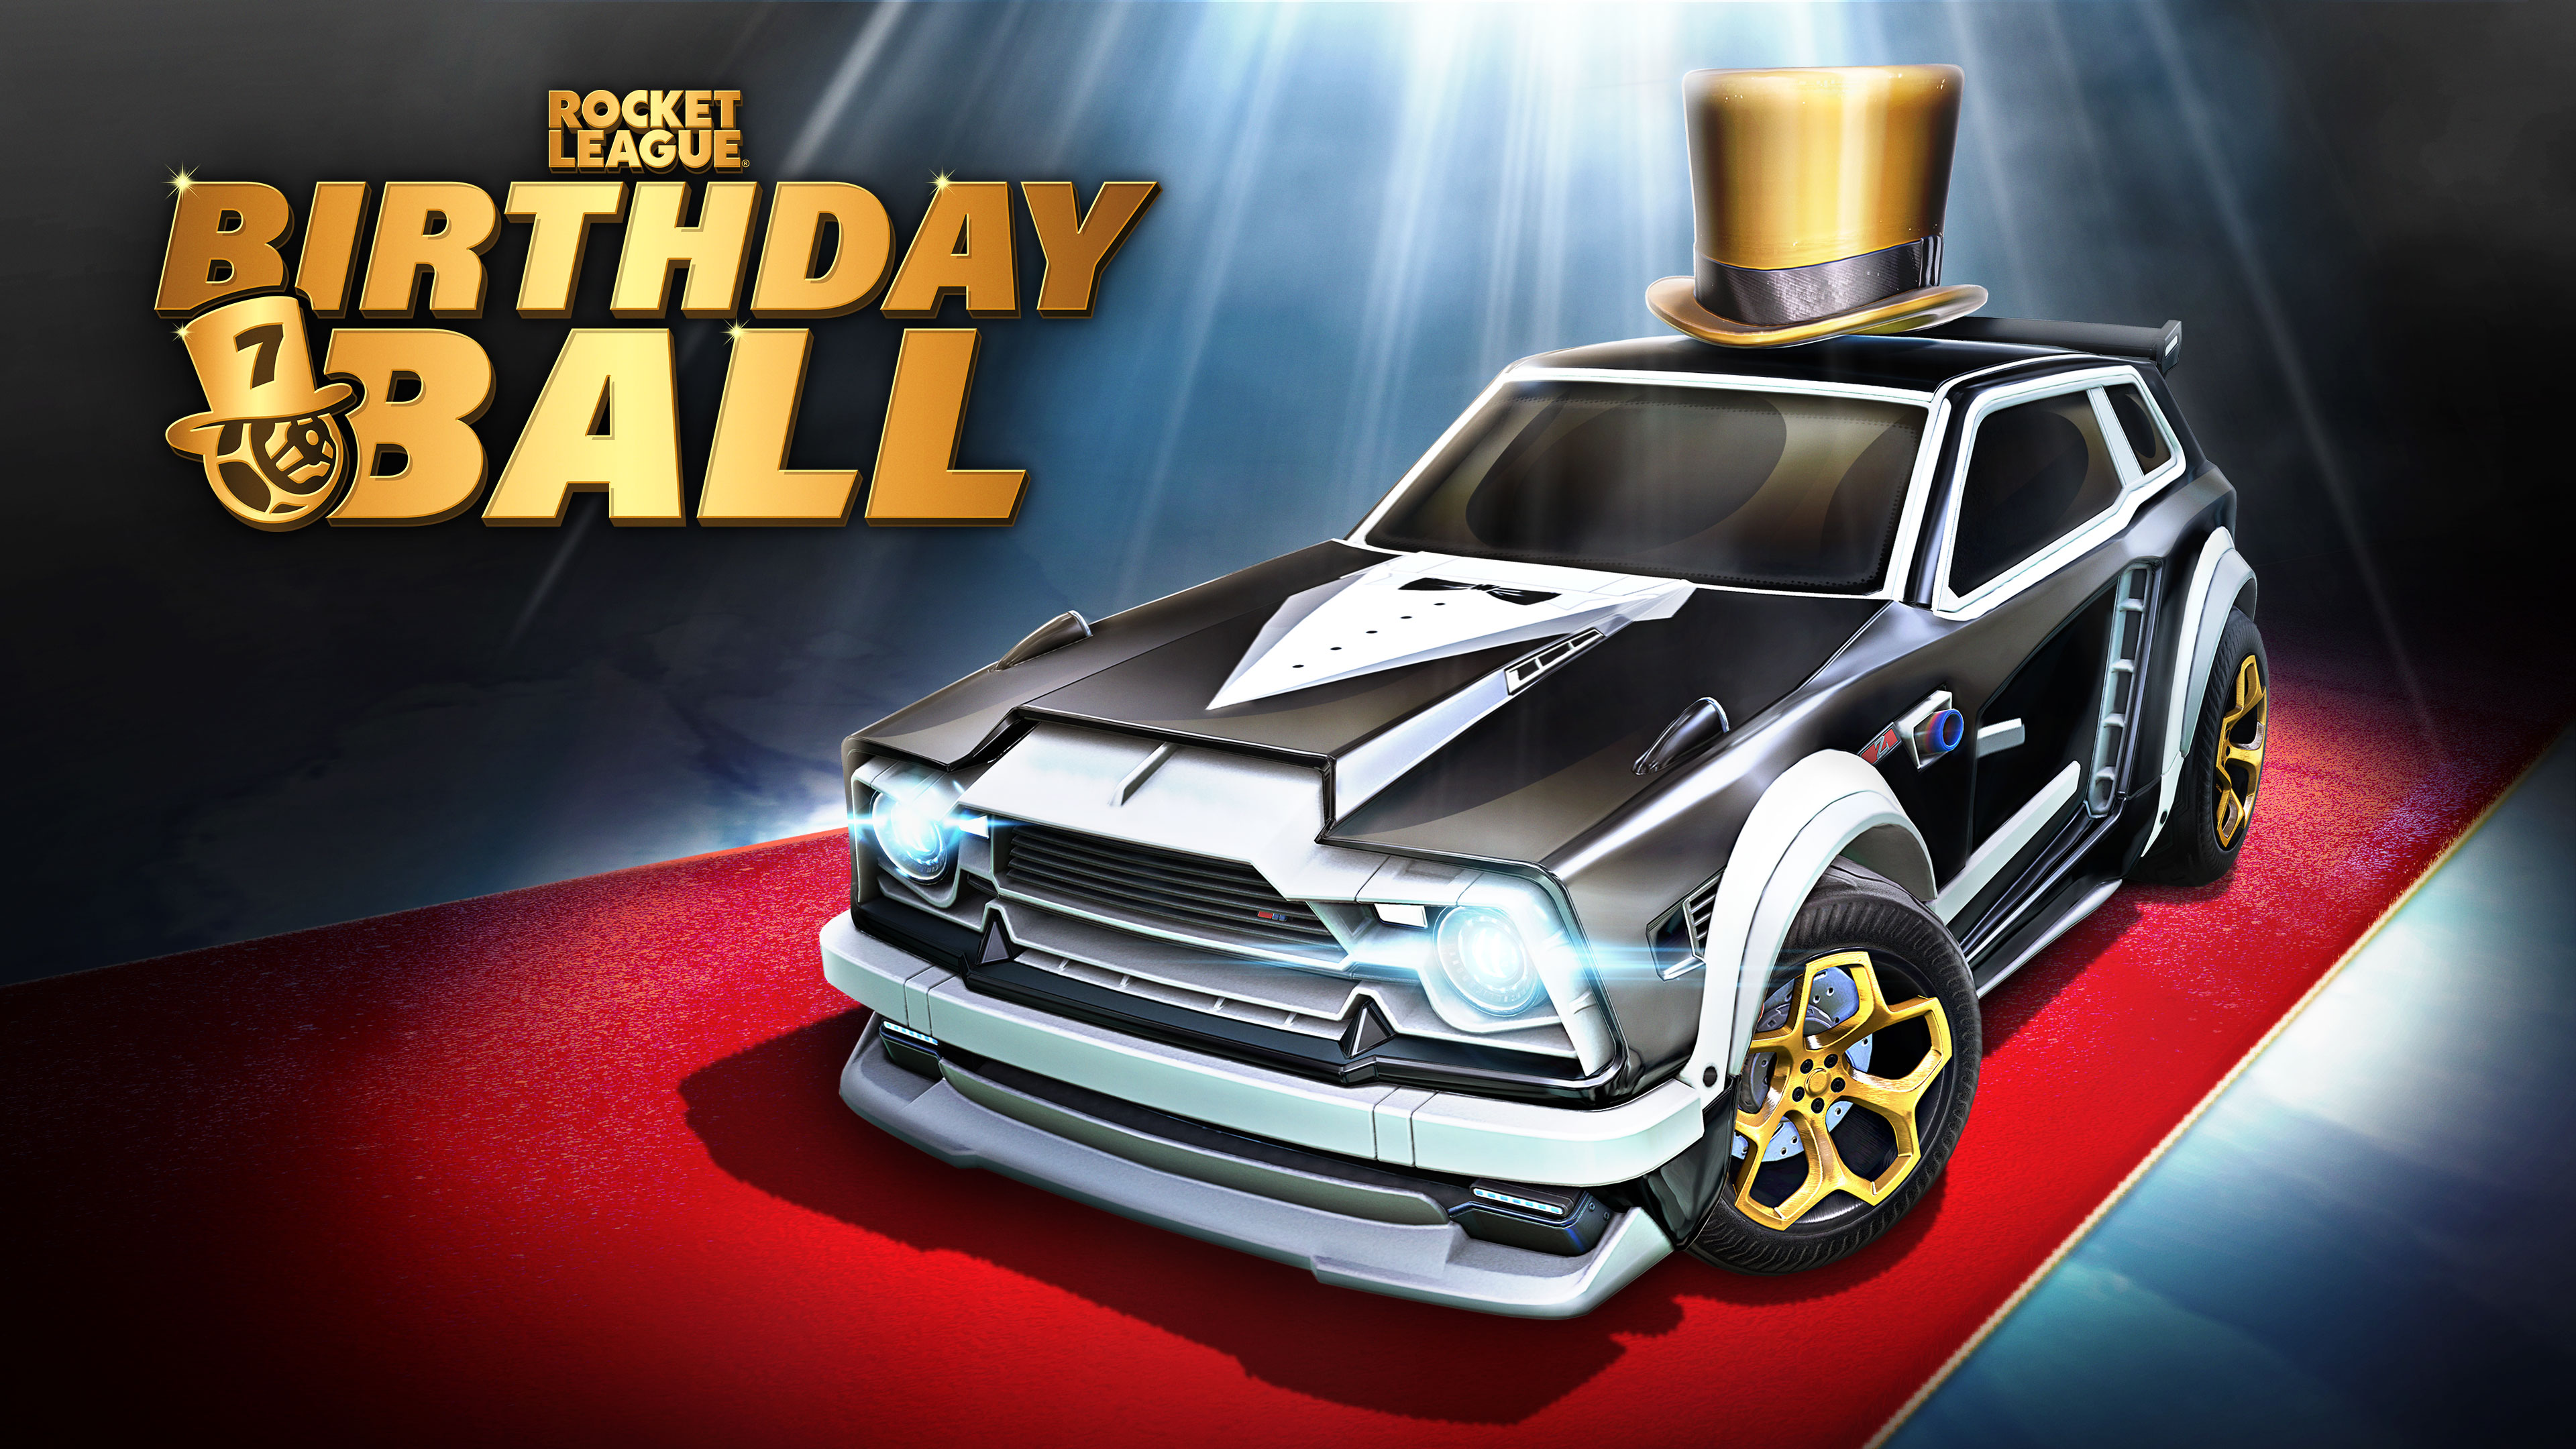 Video For Rocket League Celebrates Seven Years of Soccar with the Birthday Ball Event